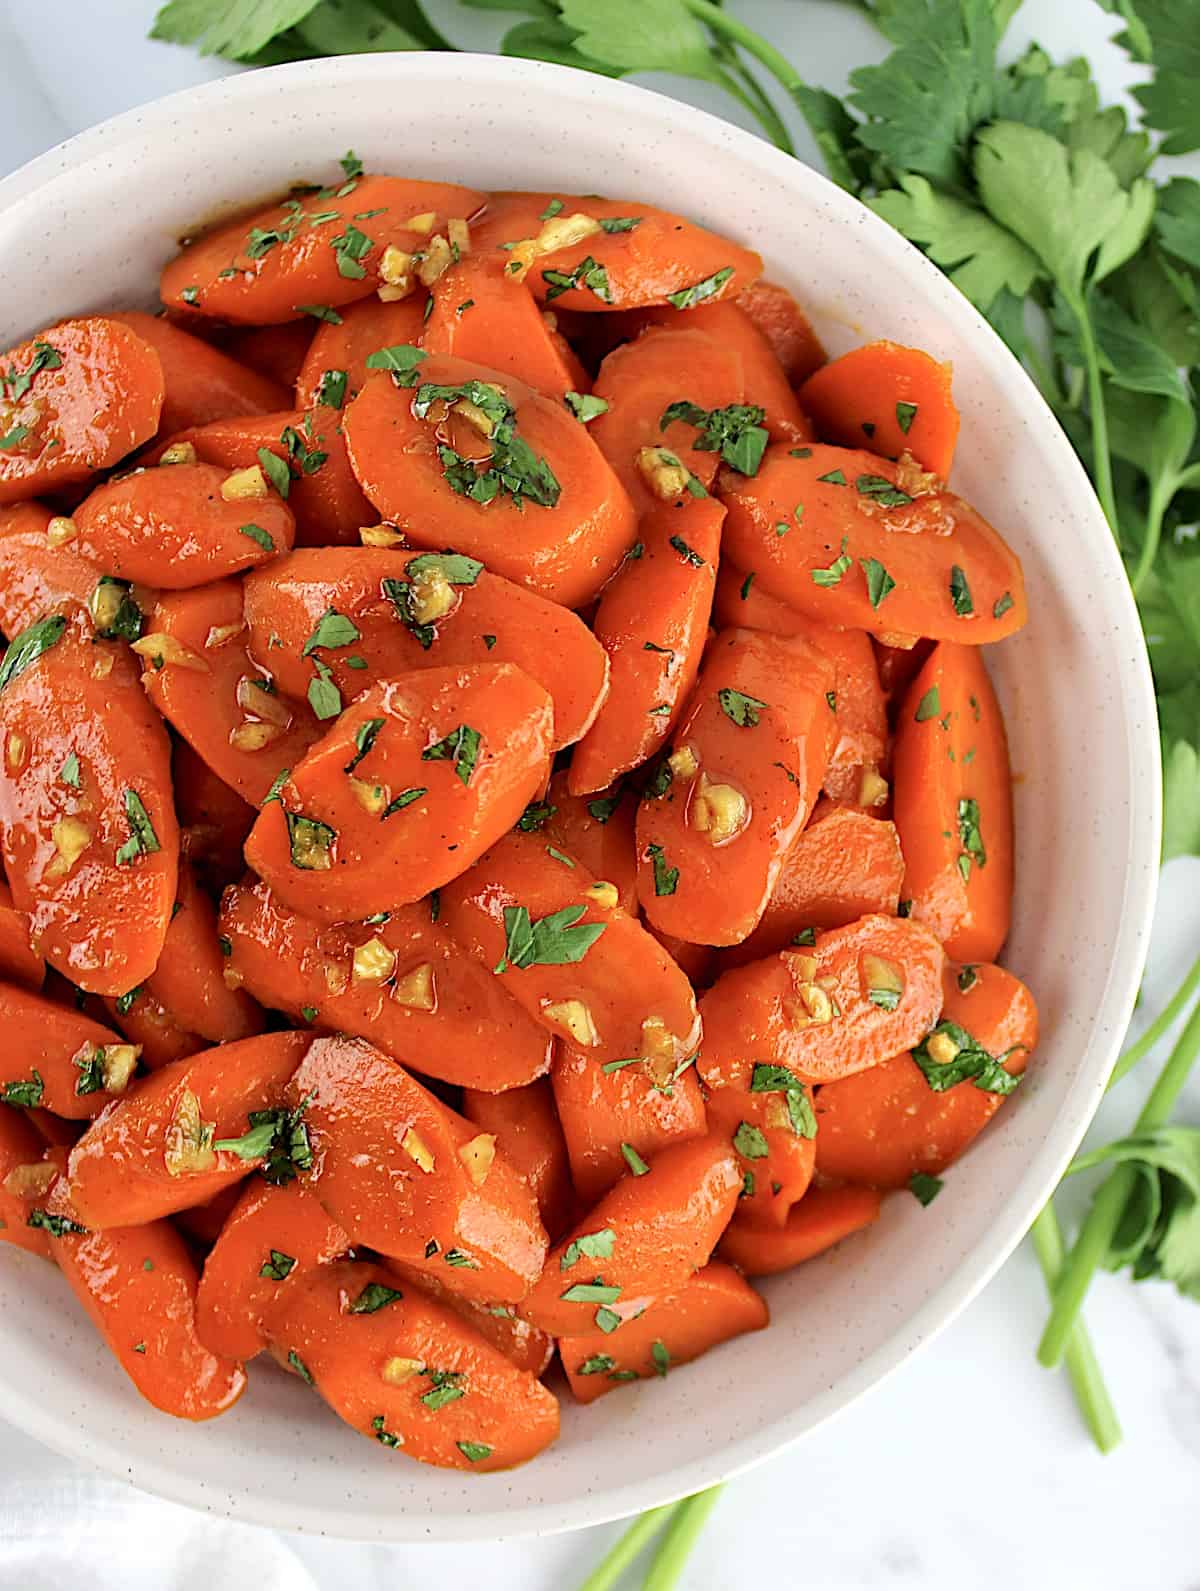 Glazed Carrots with chopped parsley on top in white bowl